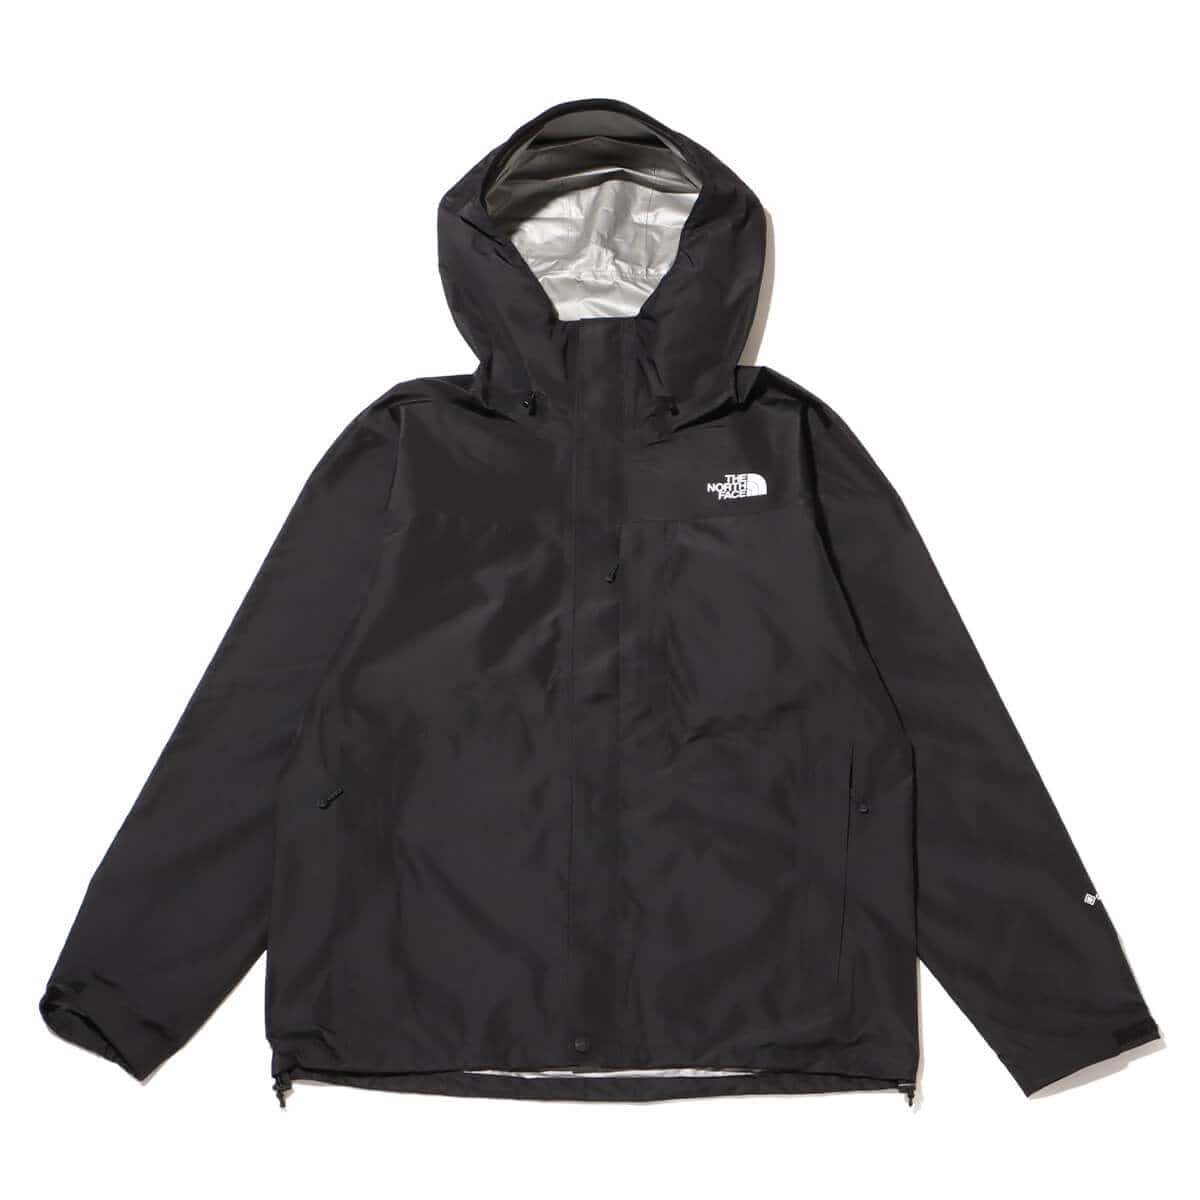 THE NORTH FACE Cloud Jacket ブラック